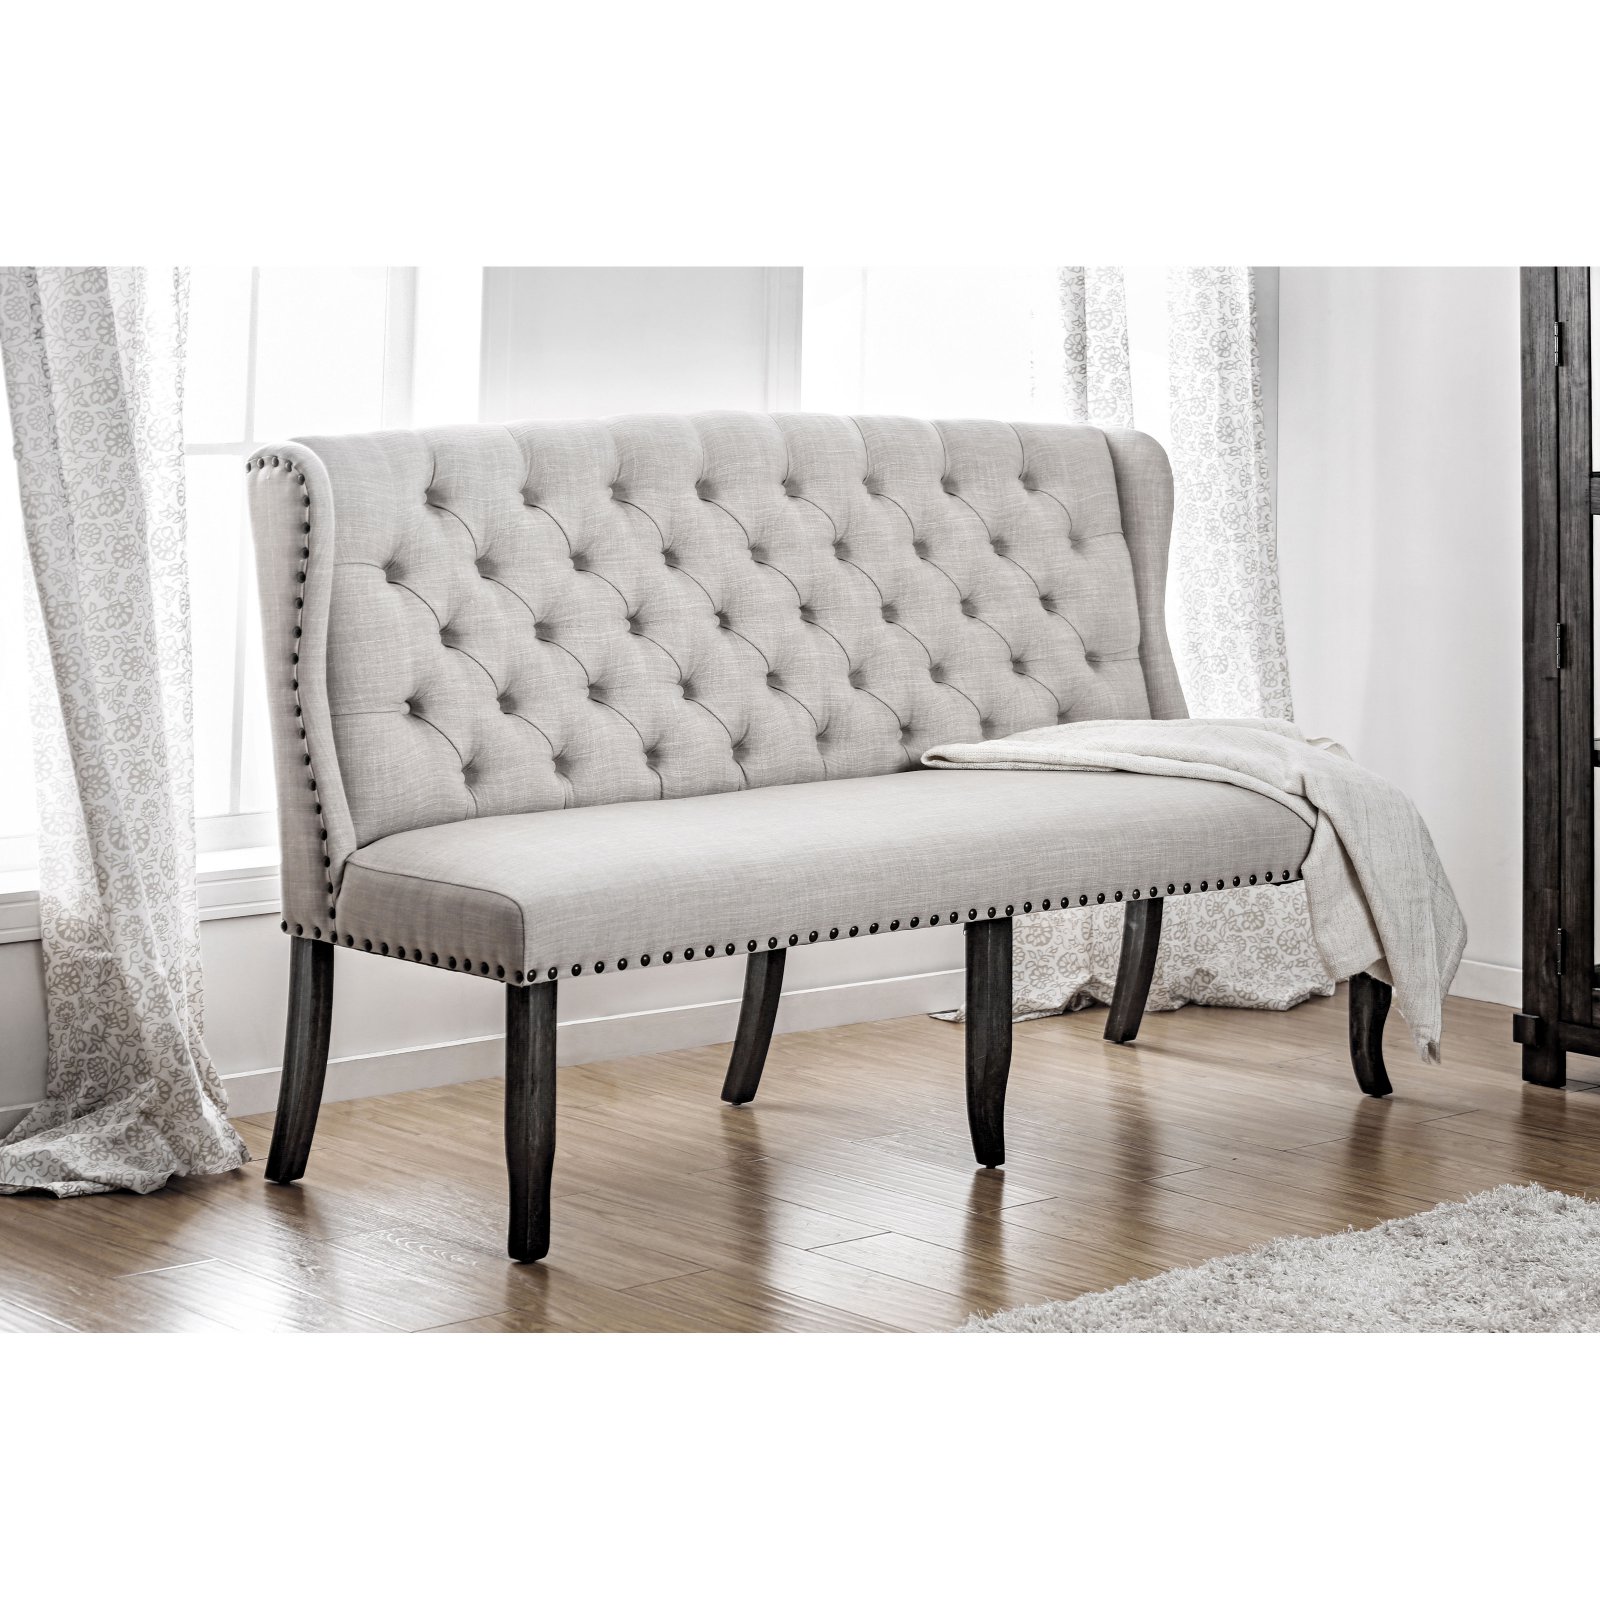 Furniture of America Oper Rustic 3-Seater Tufted Linen-like Fabric Loveseat  Dining Bench - Traveller Location